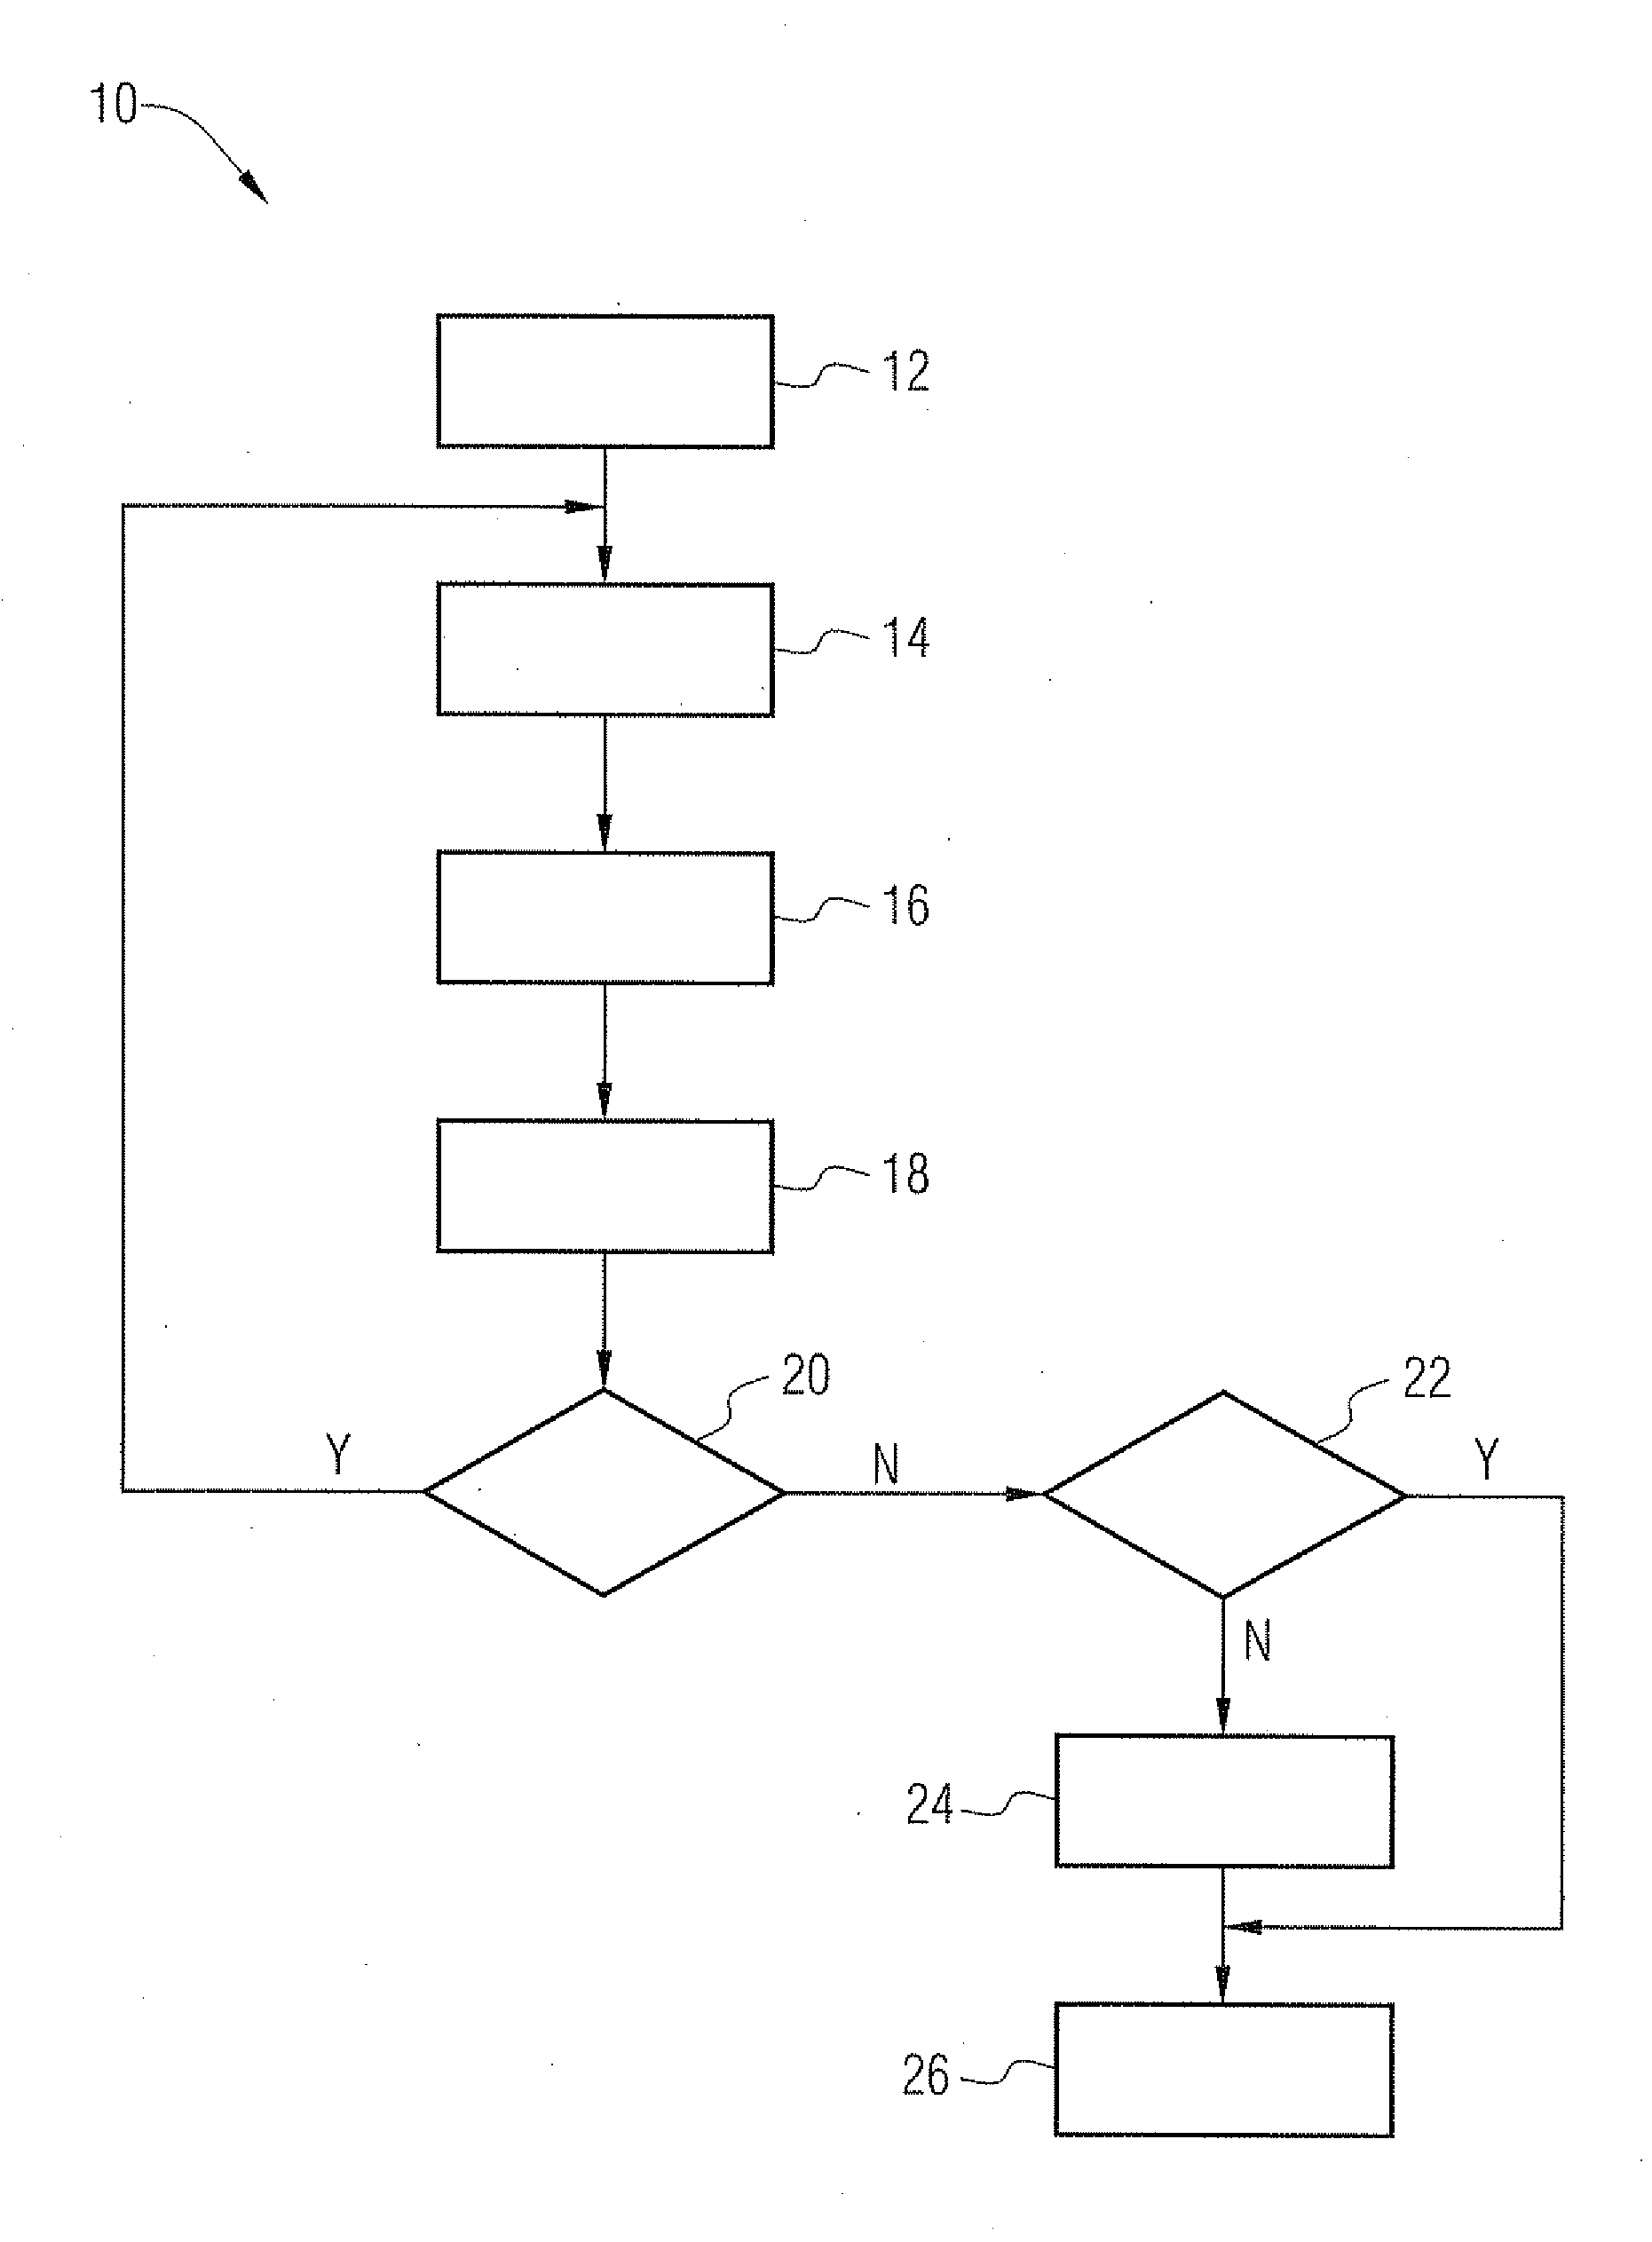 System and method for identifying oppotunities for refactoring in an object-oriented program